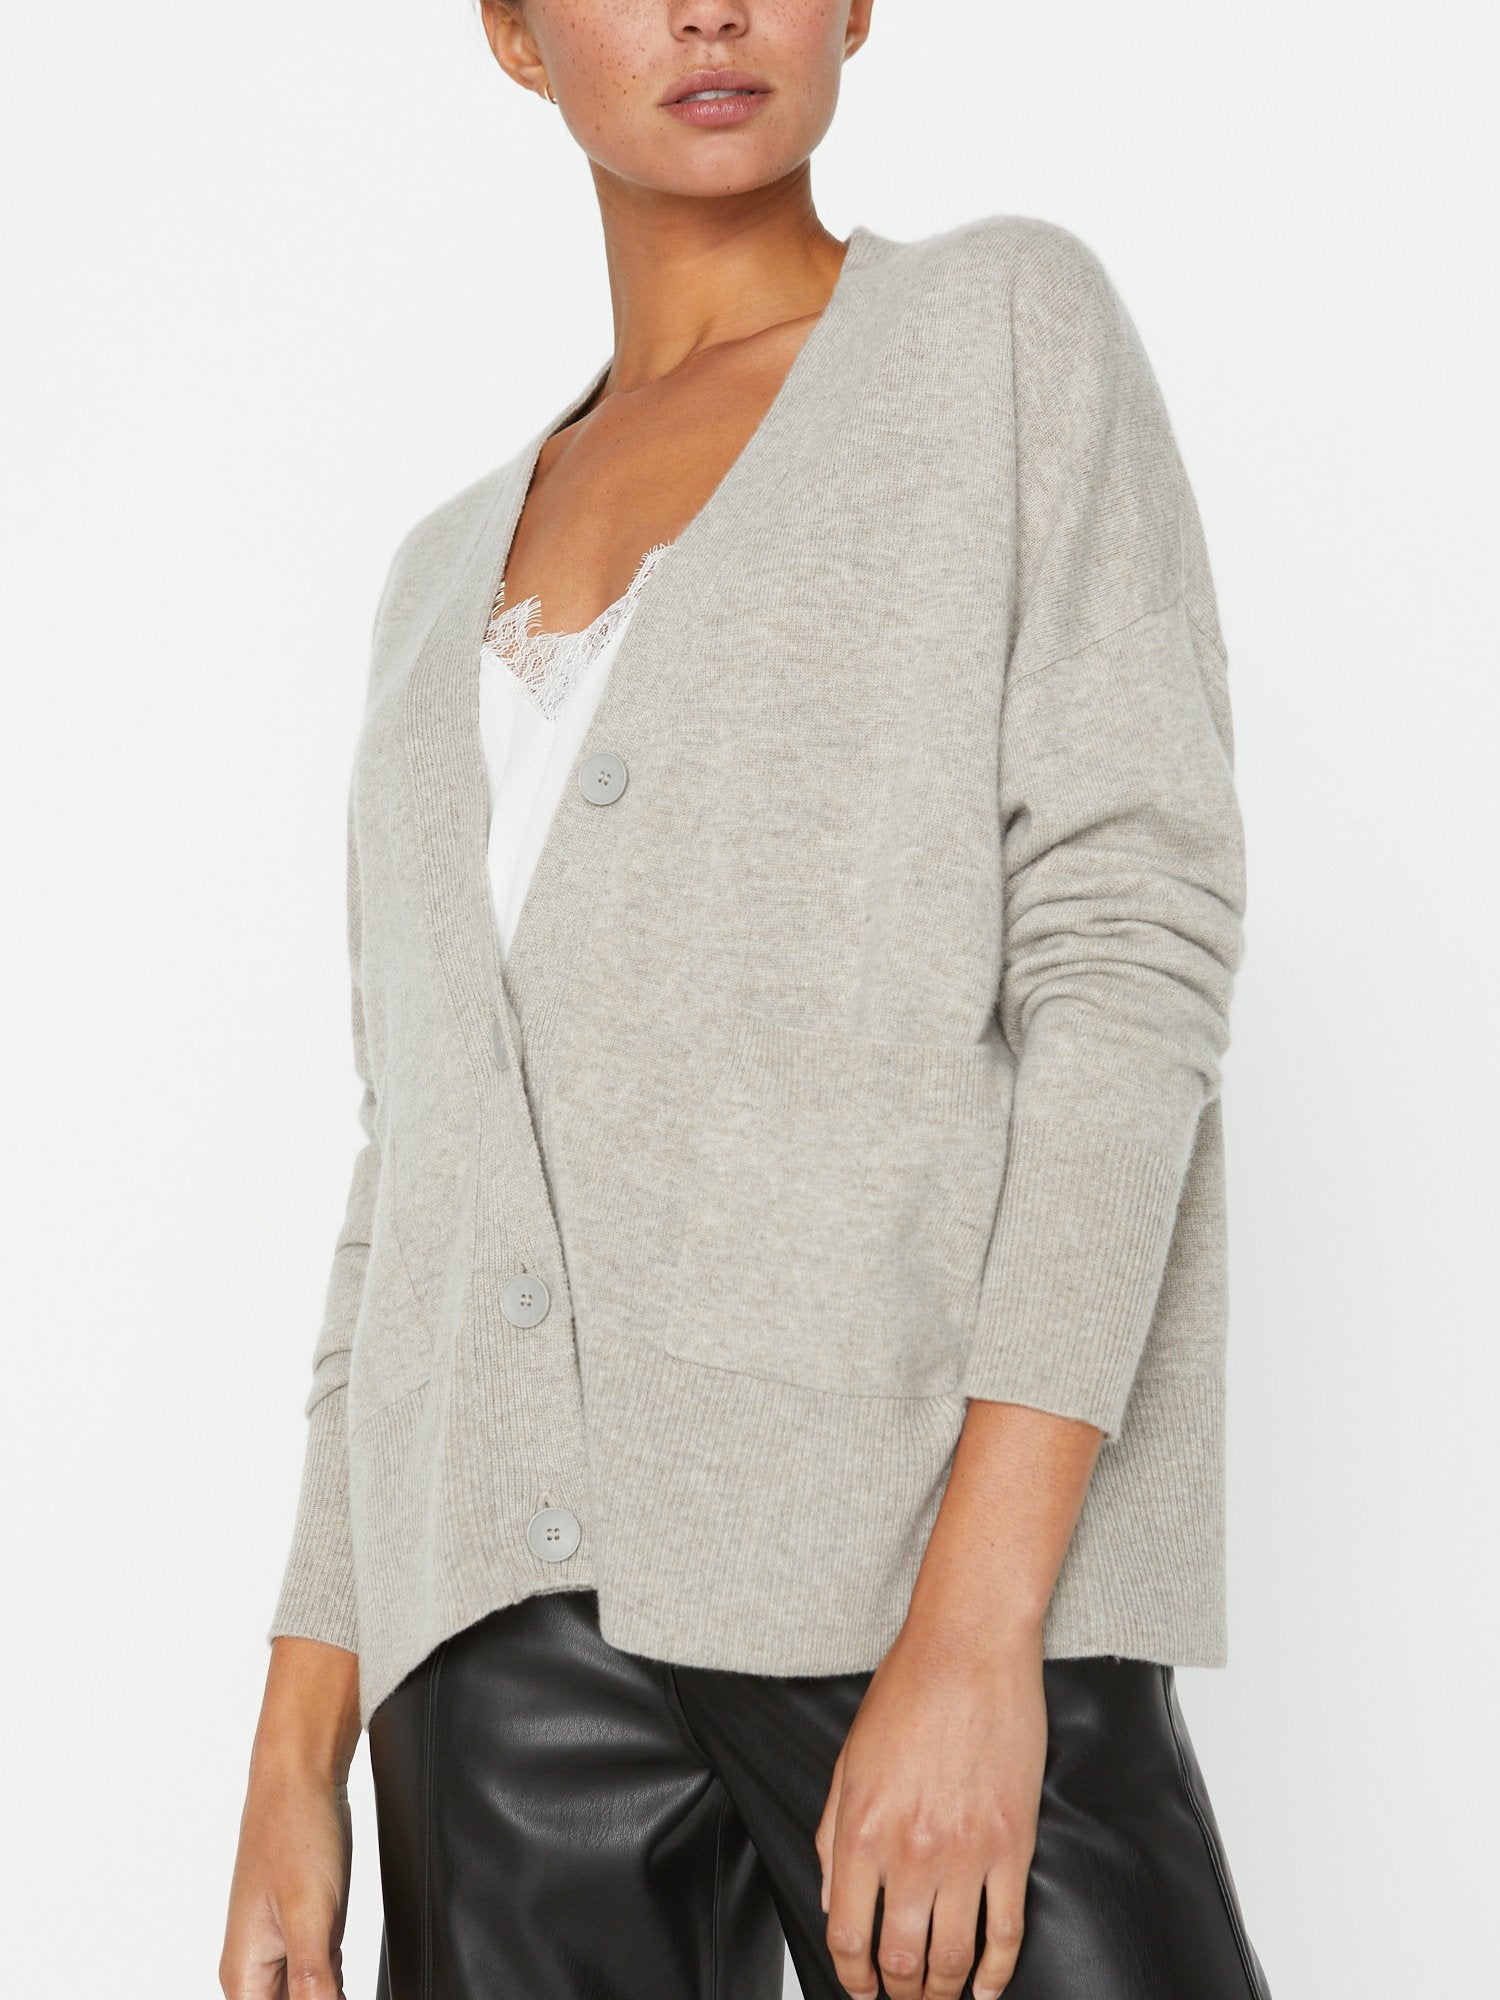 The Lace Looker Cardigan